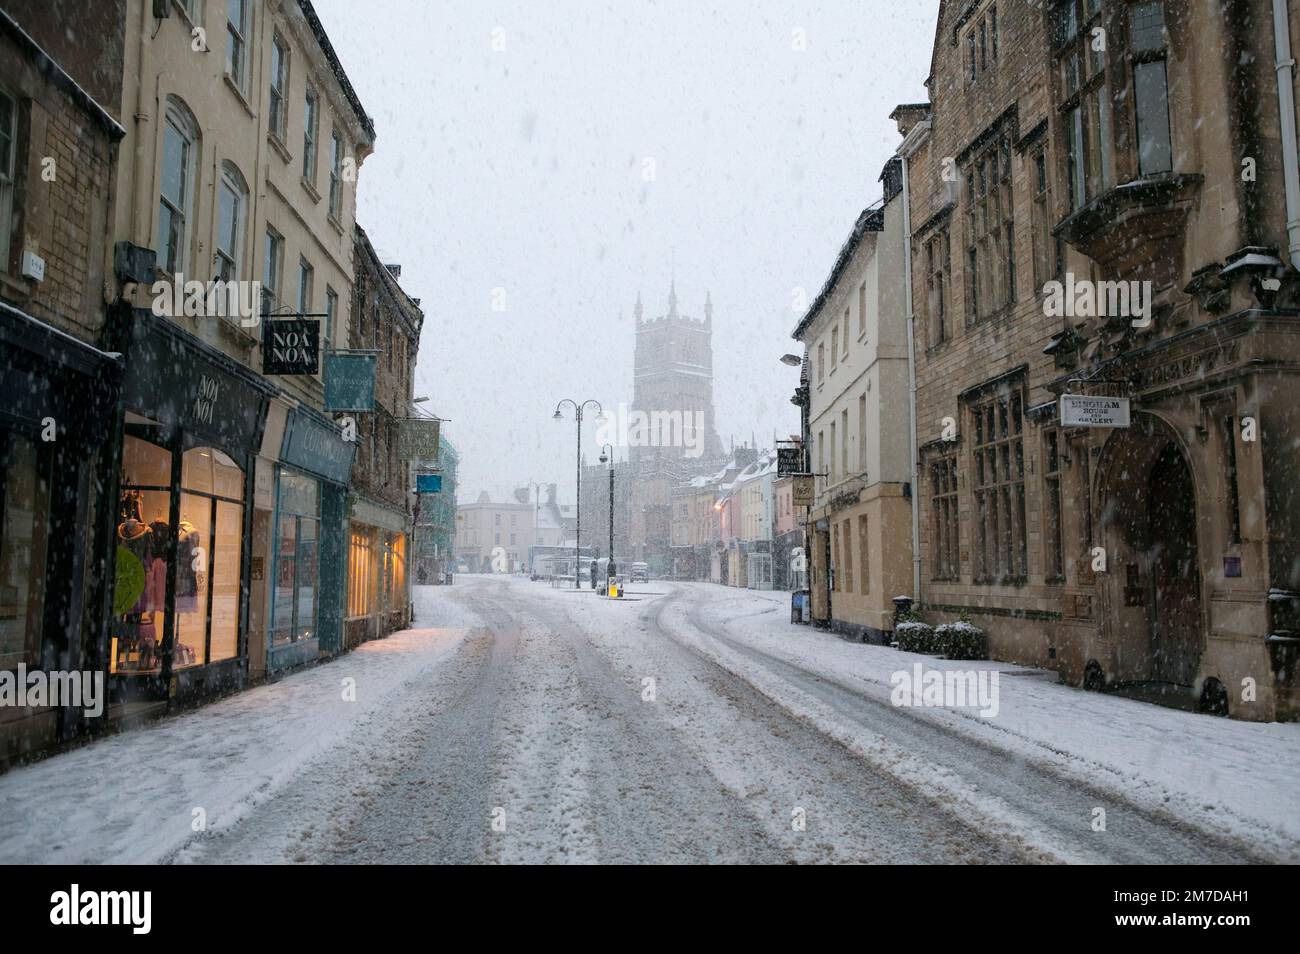 The MArket square of Cirencester in the heart of the Cotswolds, Uk covered in a layer of snow in the depths of winter. Clearly showing the tower adn church of St john the Baptist all the buildings are coverd in this unusually heavy downfall of snow. Stock Photo